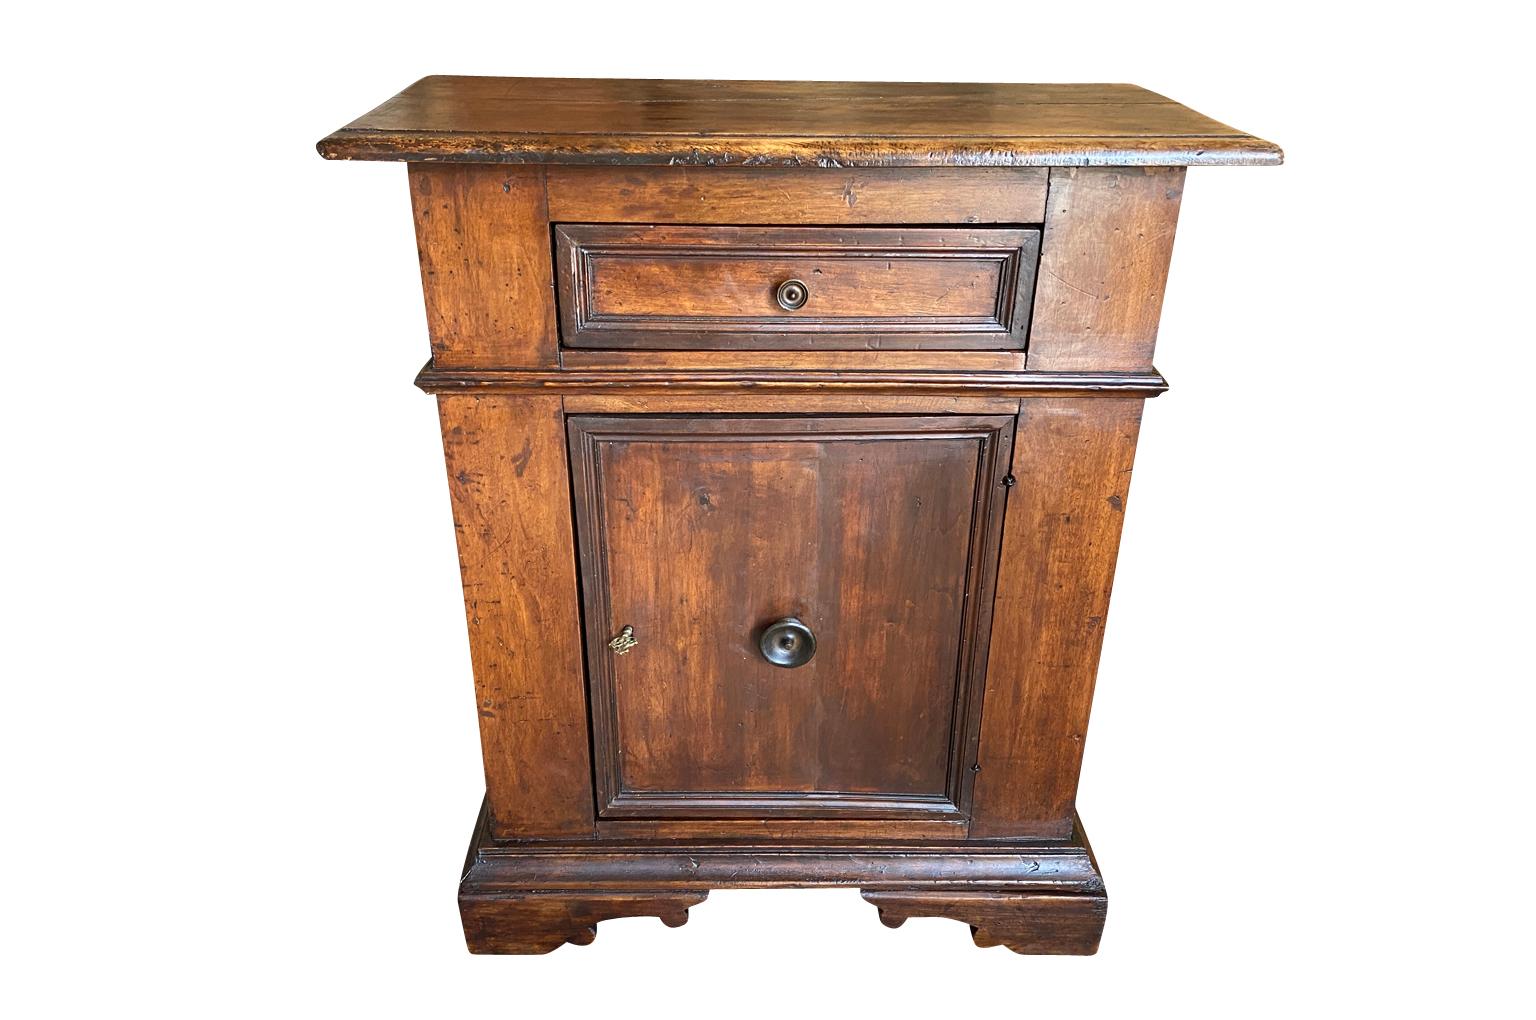 A very handsome early 19th century Credenzino from the Lombardy region of Italy. Beautifully constructed from walnut with one drawer, one door, interior shelving raised on bracket feet. Lovely patina - warm and luminous.